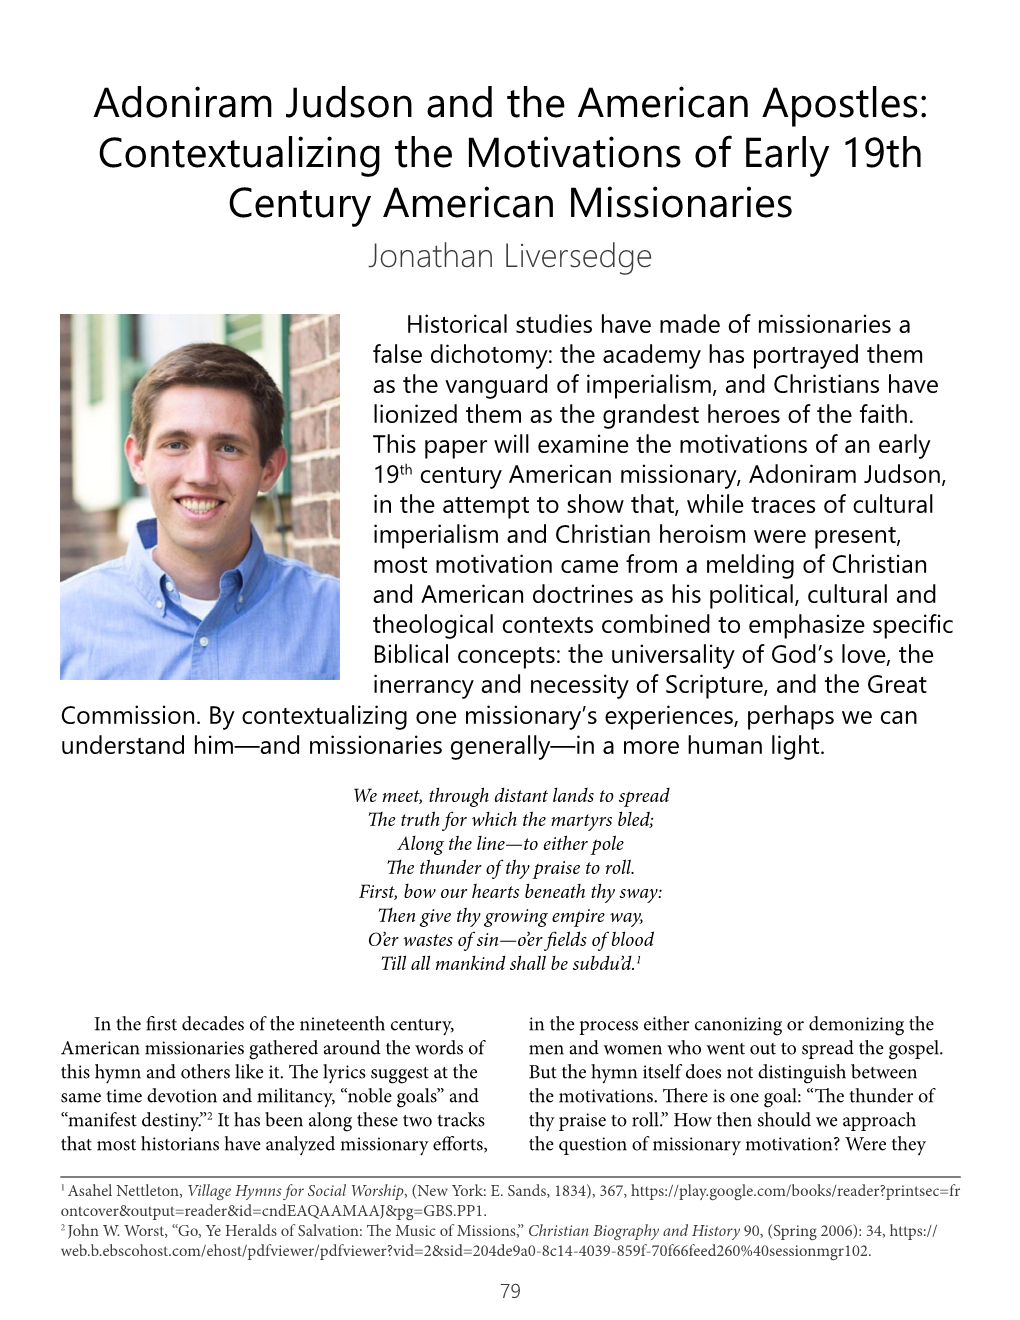 Adoniram Judson and the American Apostles: Contextualizing the Motivations of Early 19Th Century American Missionaries Jonathan Liversedge